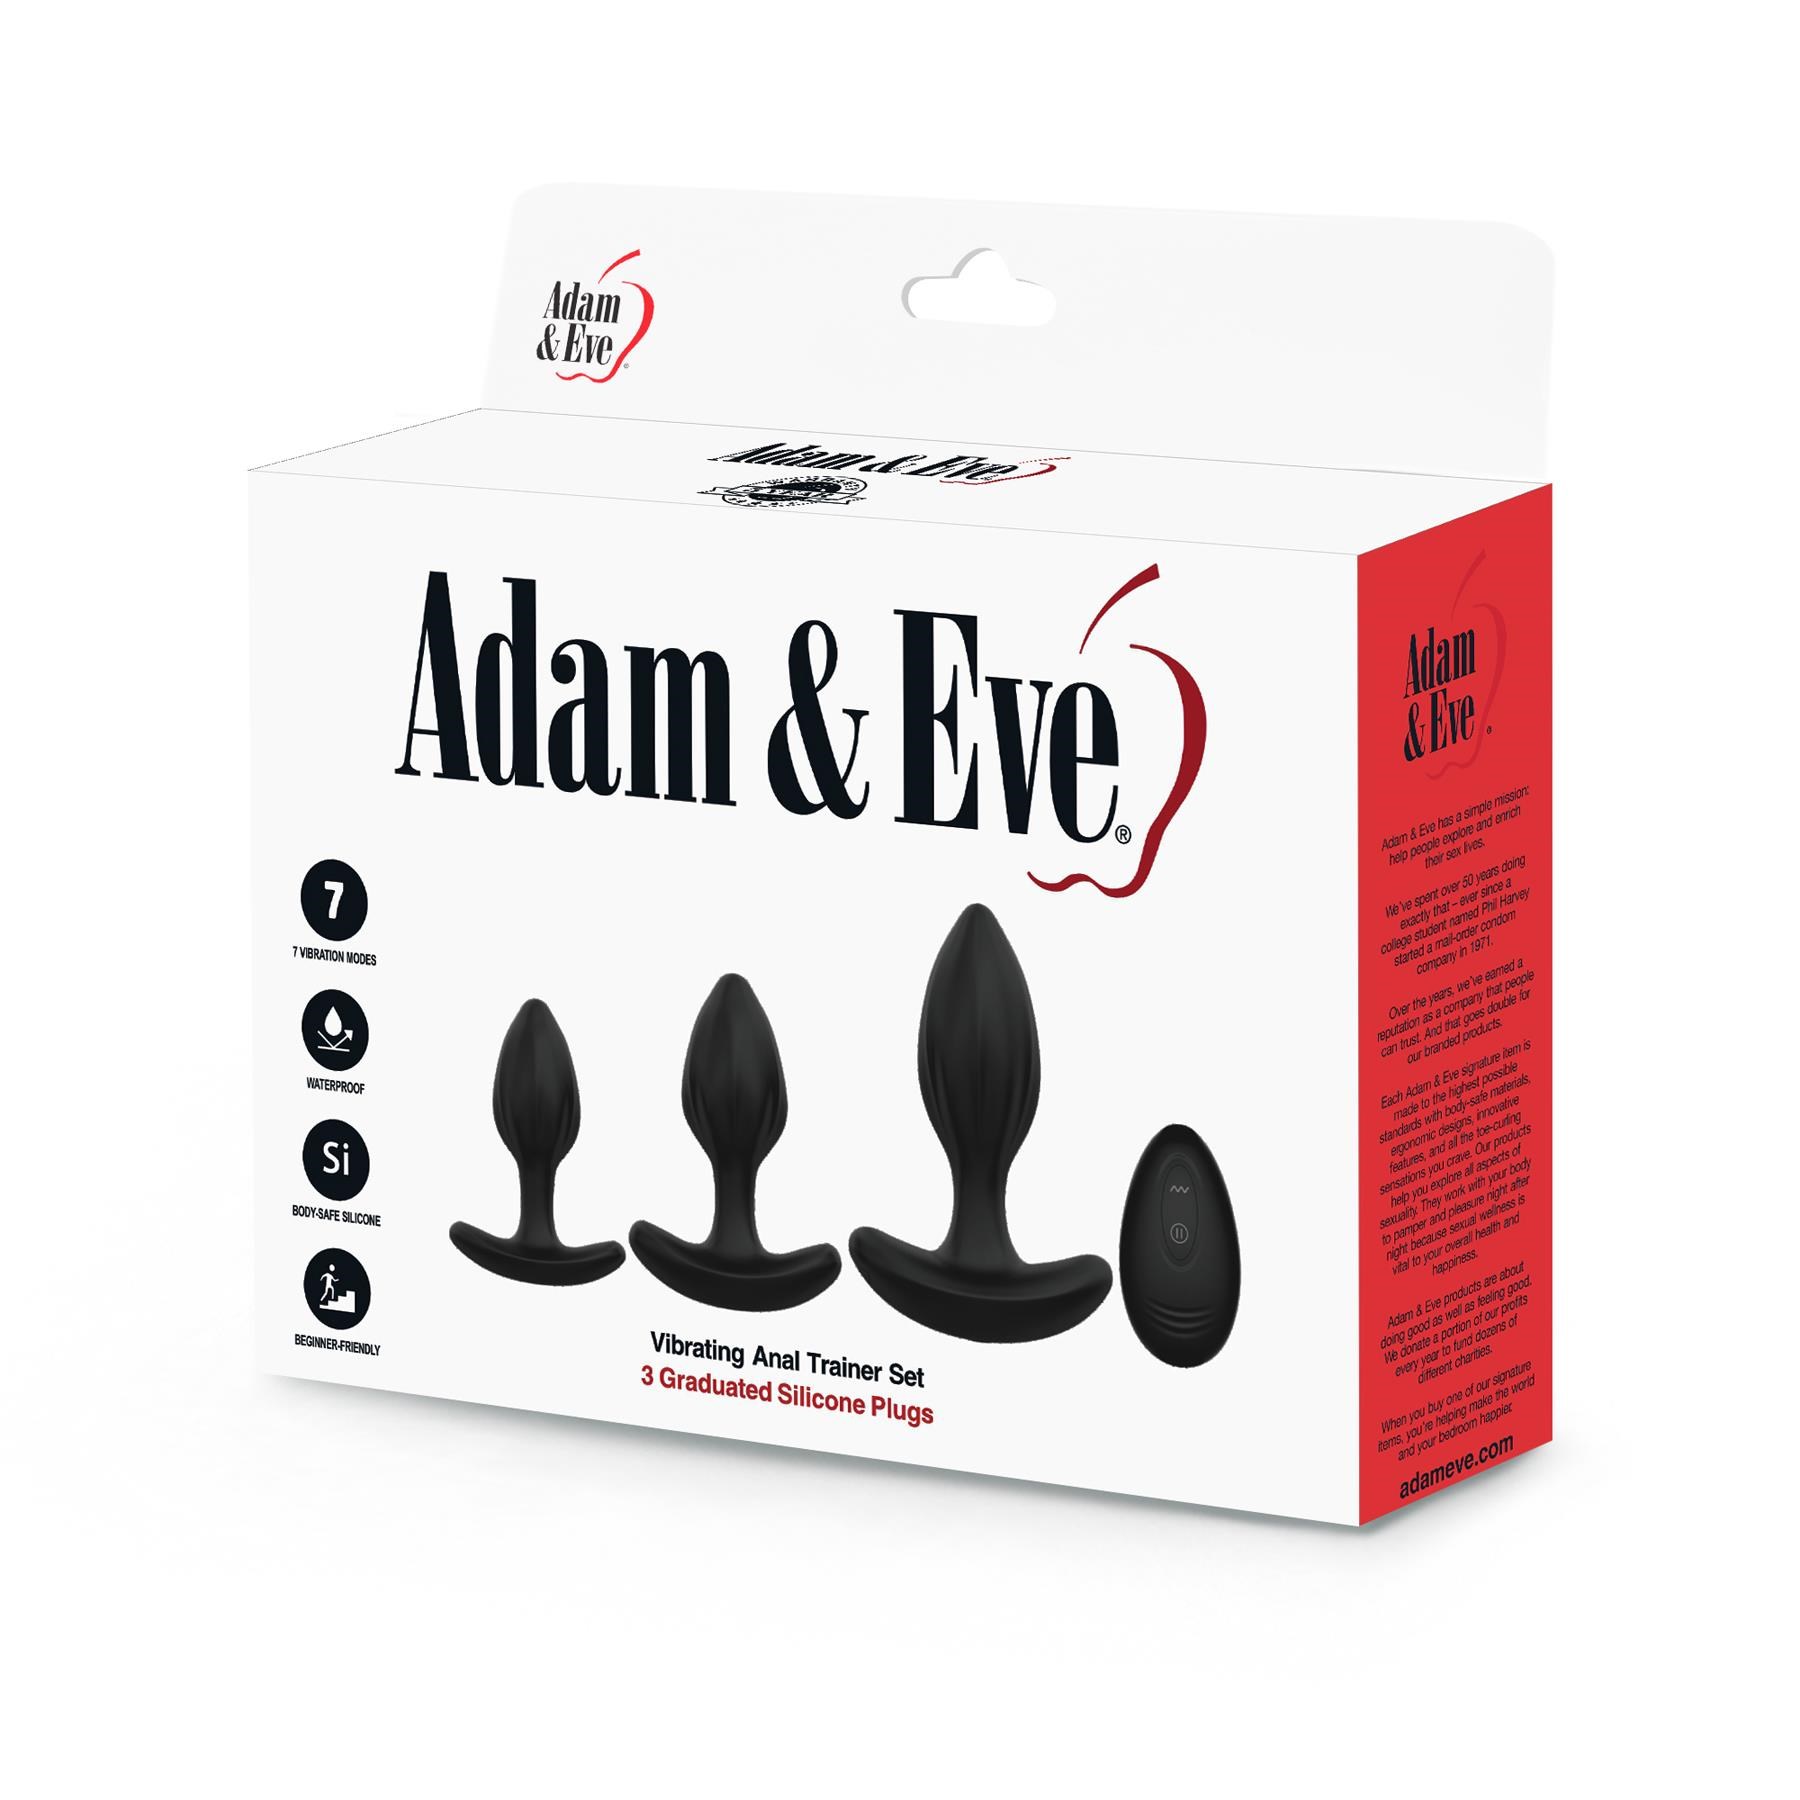 Vibrating Silicone Anal Trainer Set Packaging